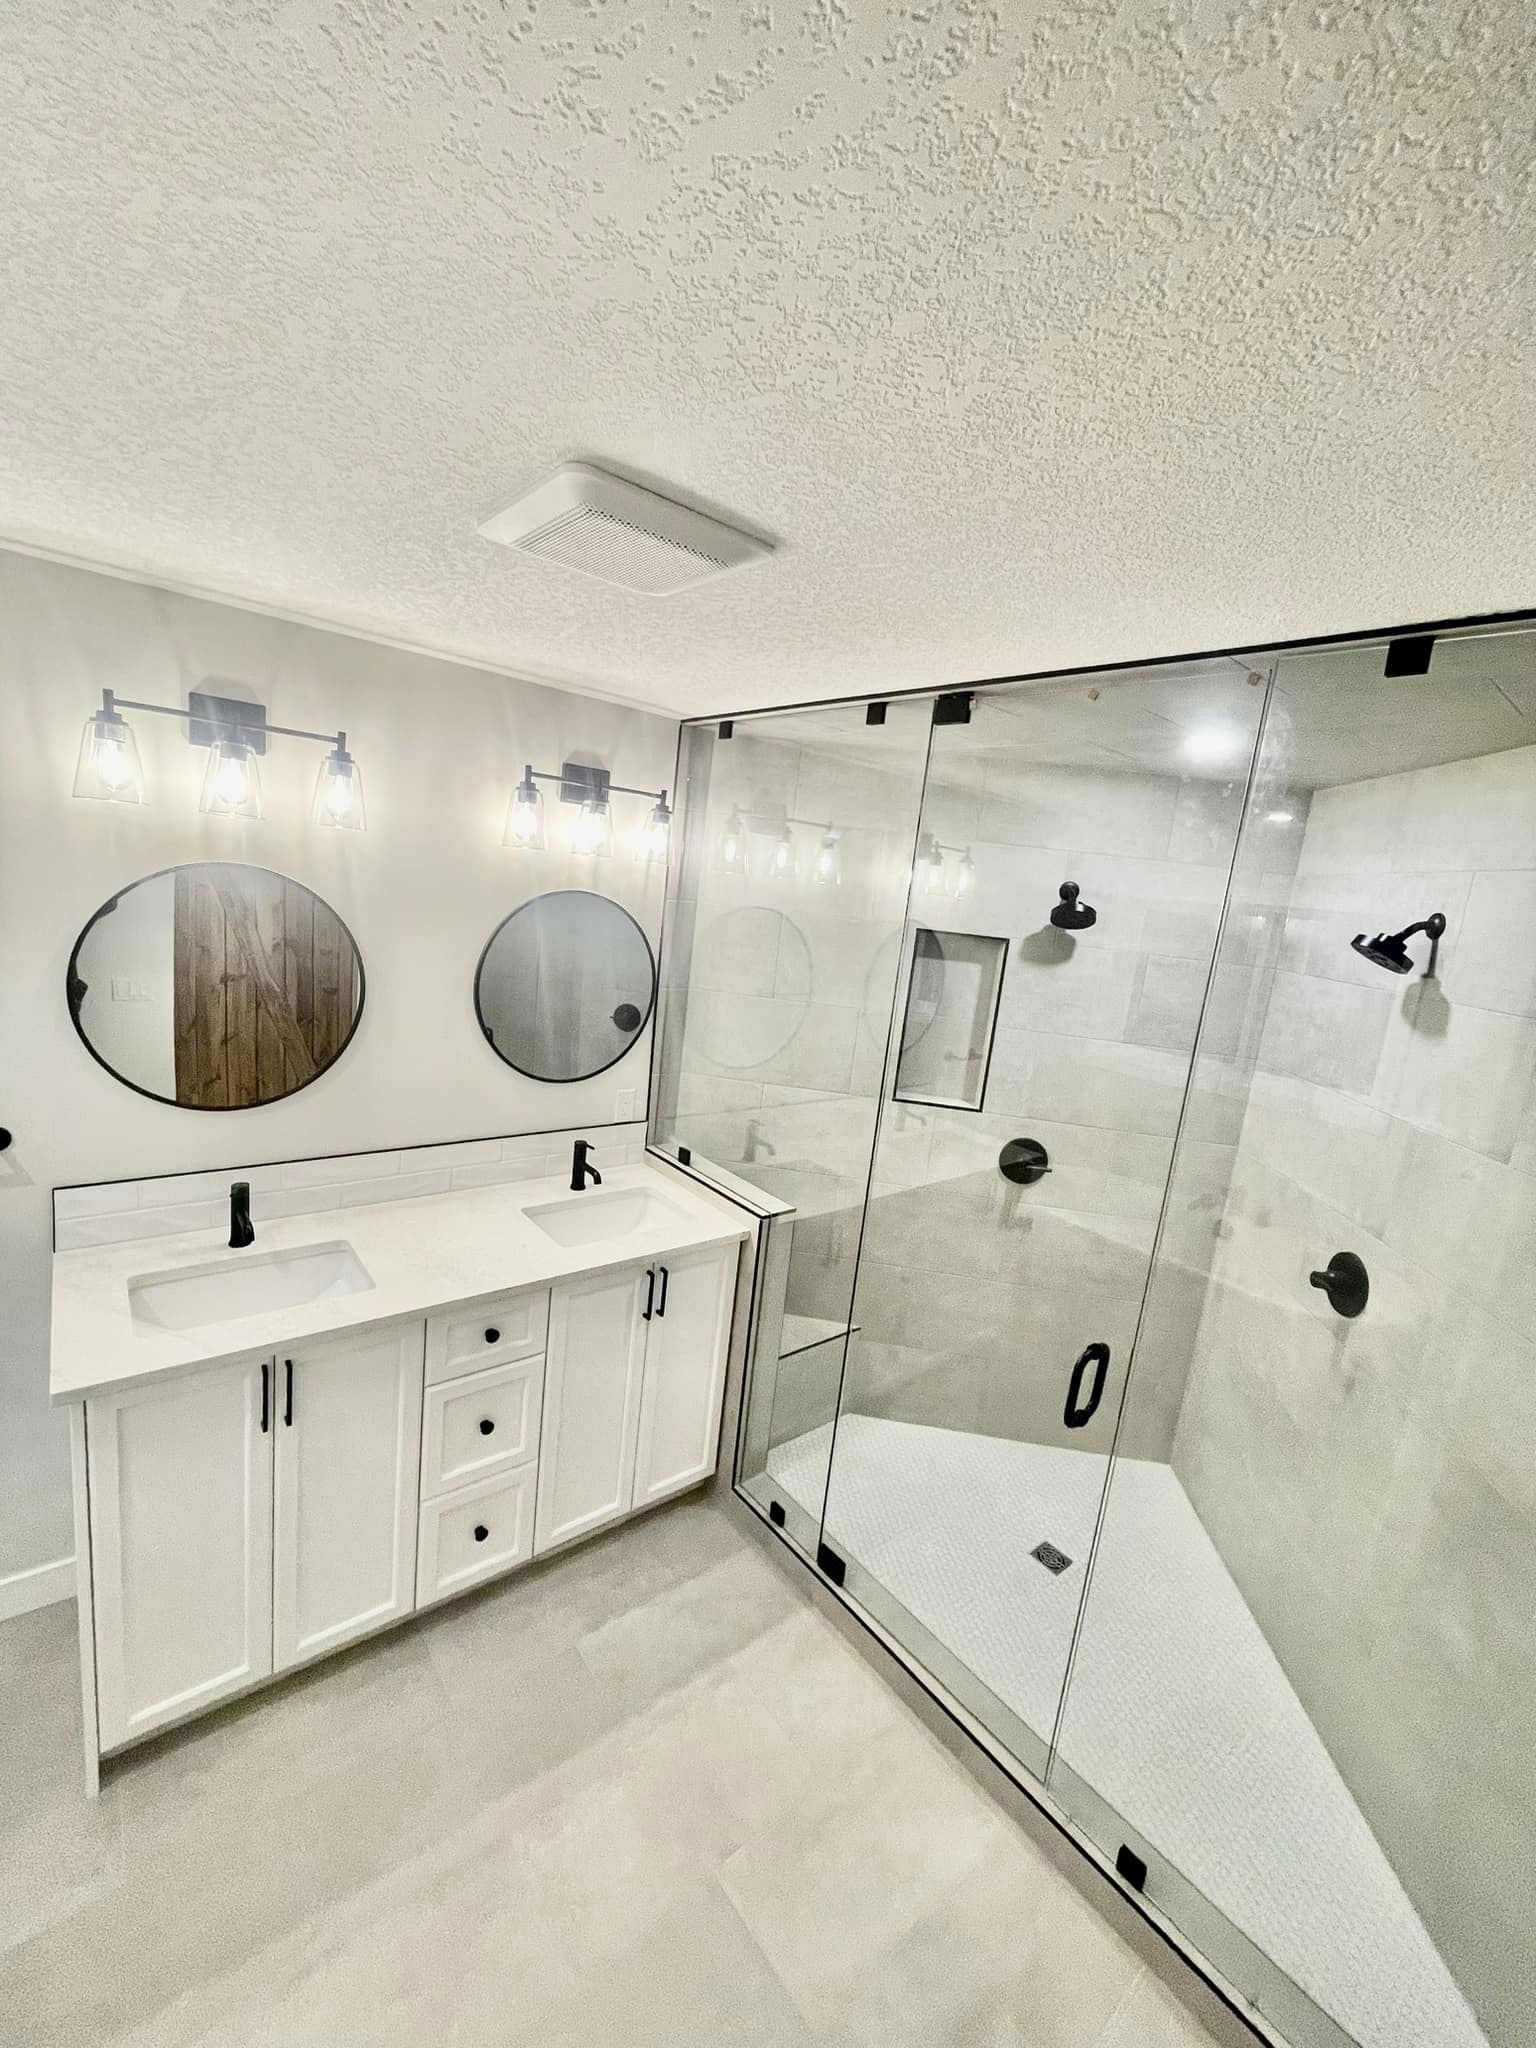 A modern bathroom with newly renovated shower and dual sink/mirror.